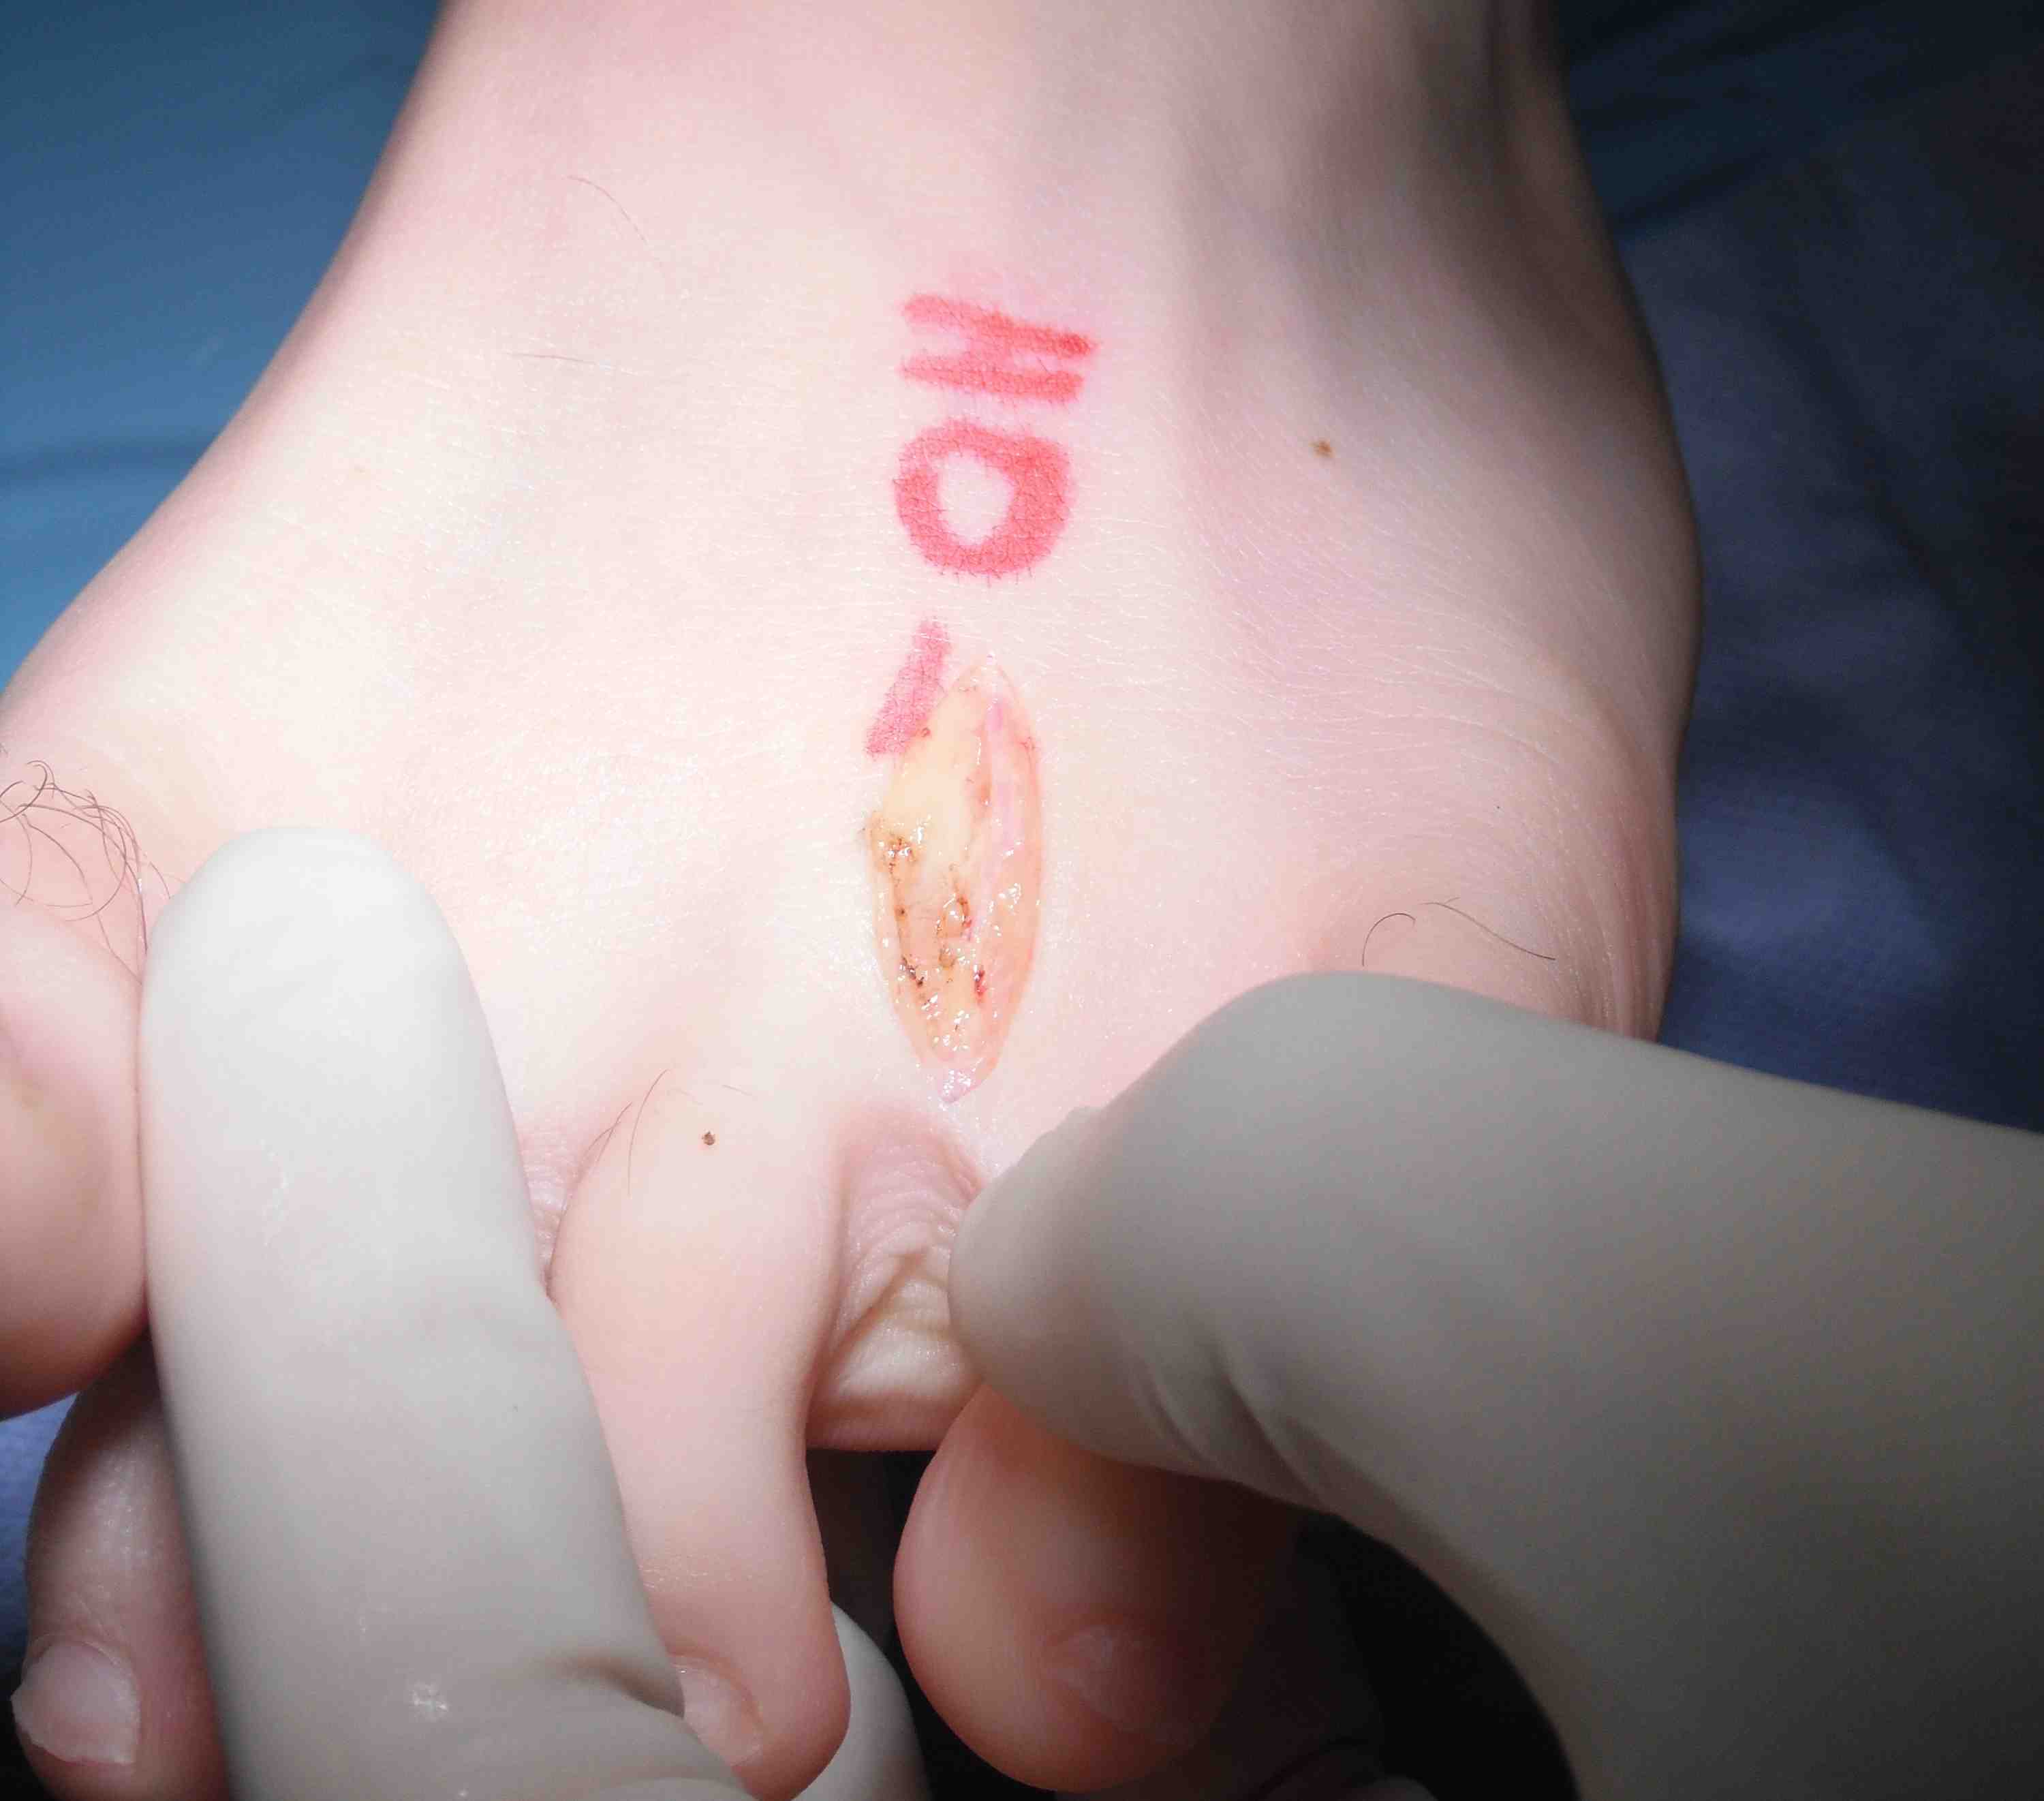 Mortons Neuroma Incision